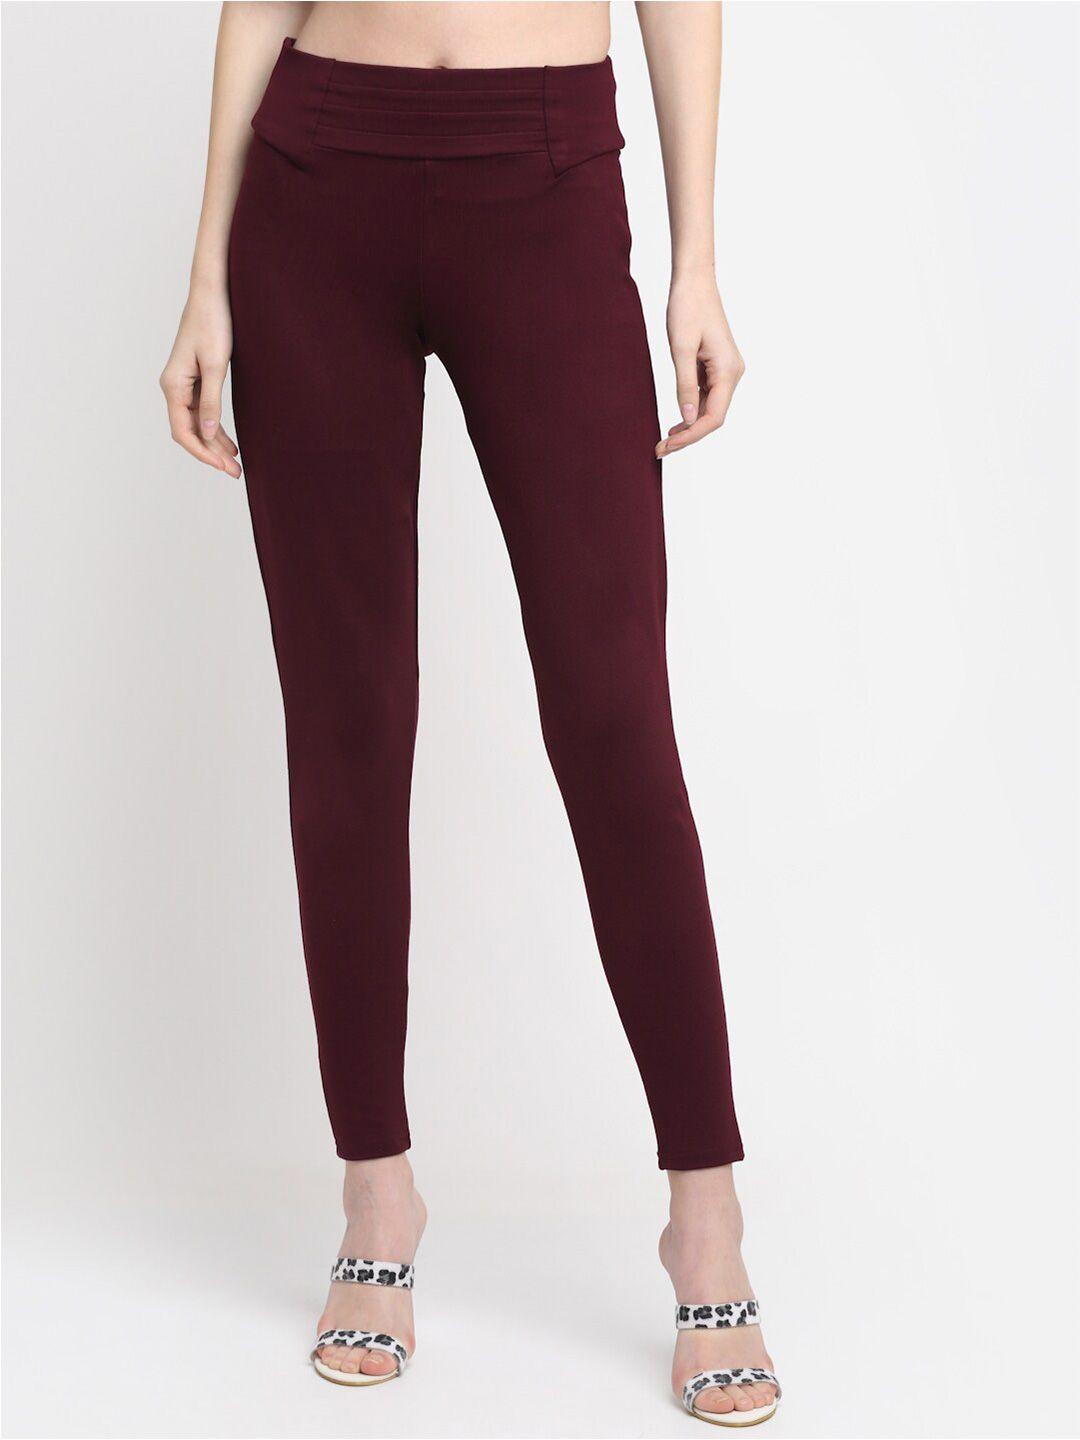 cantabil women burgundy solid cotton slim fit jeggings